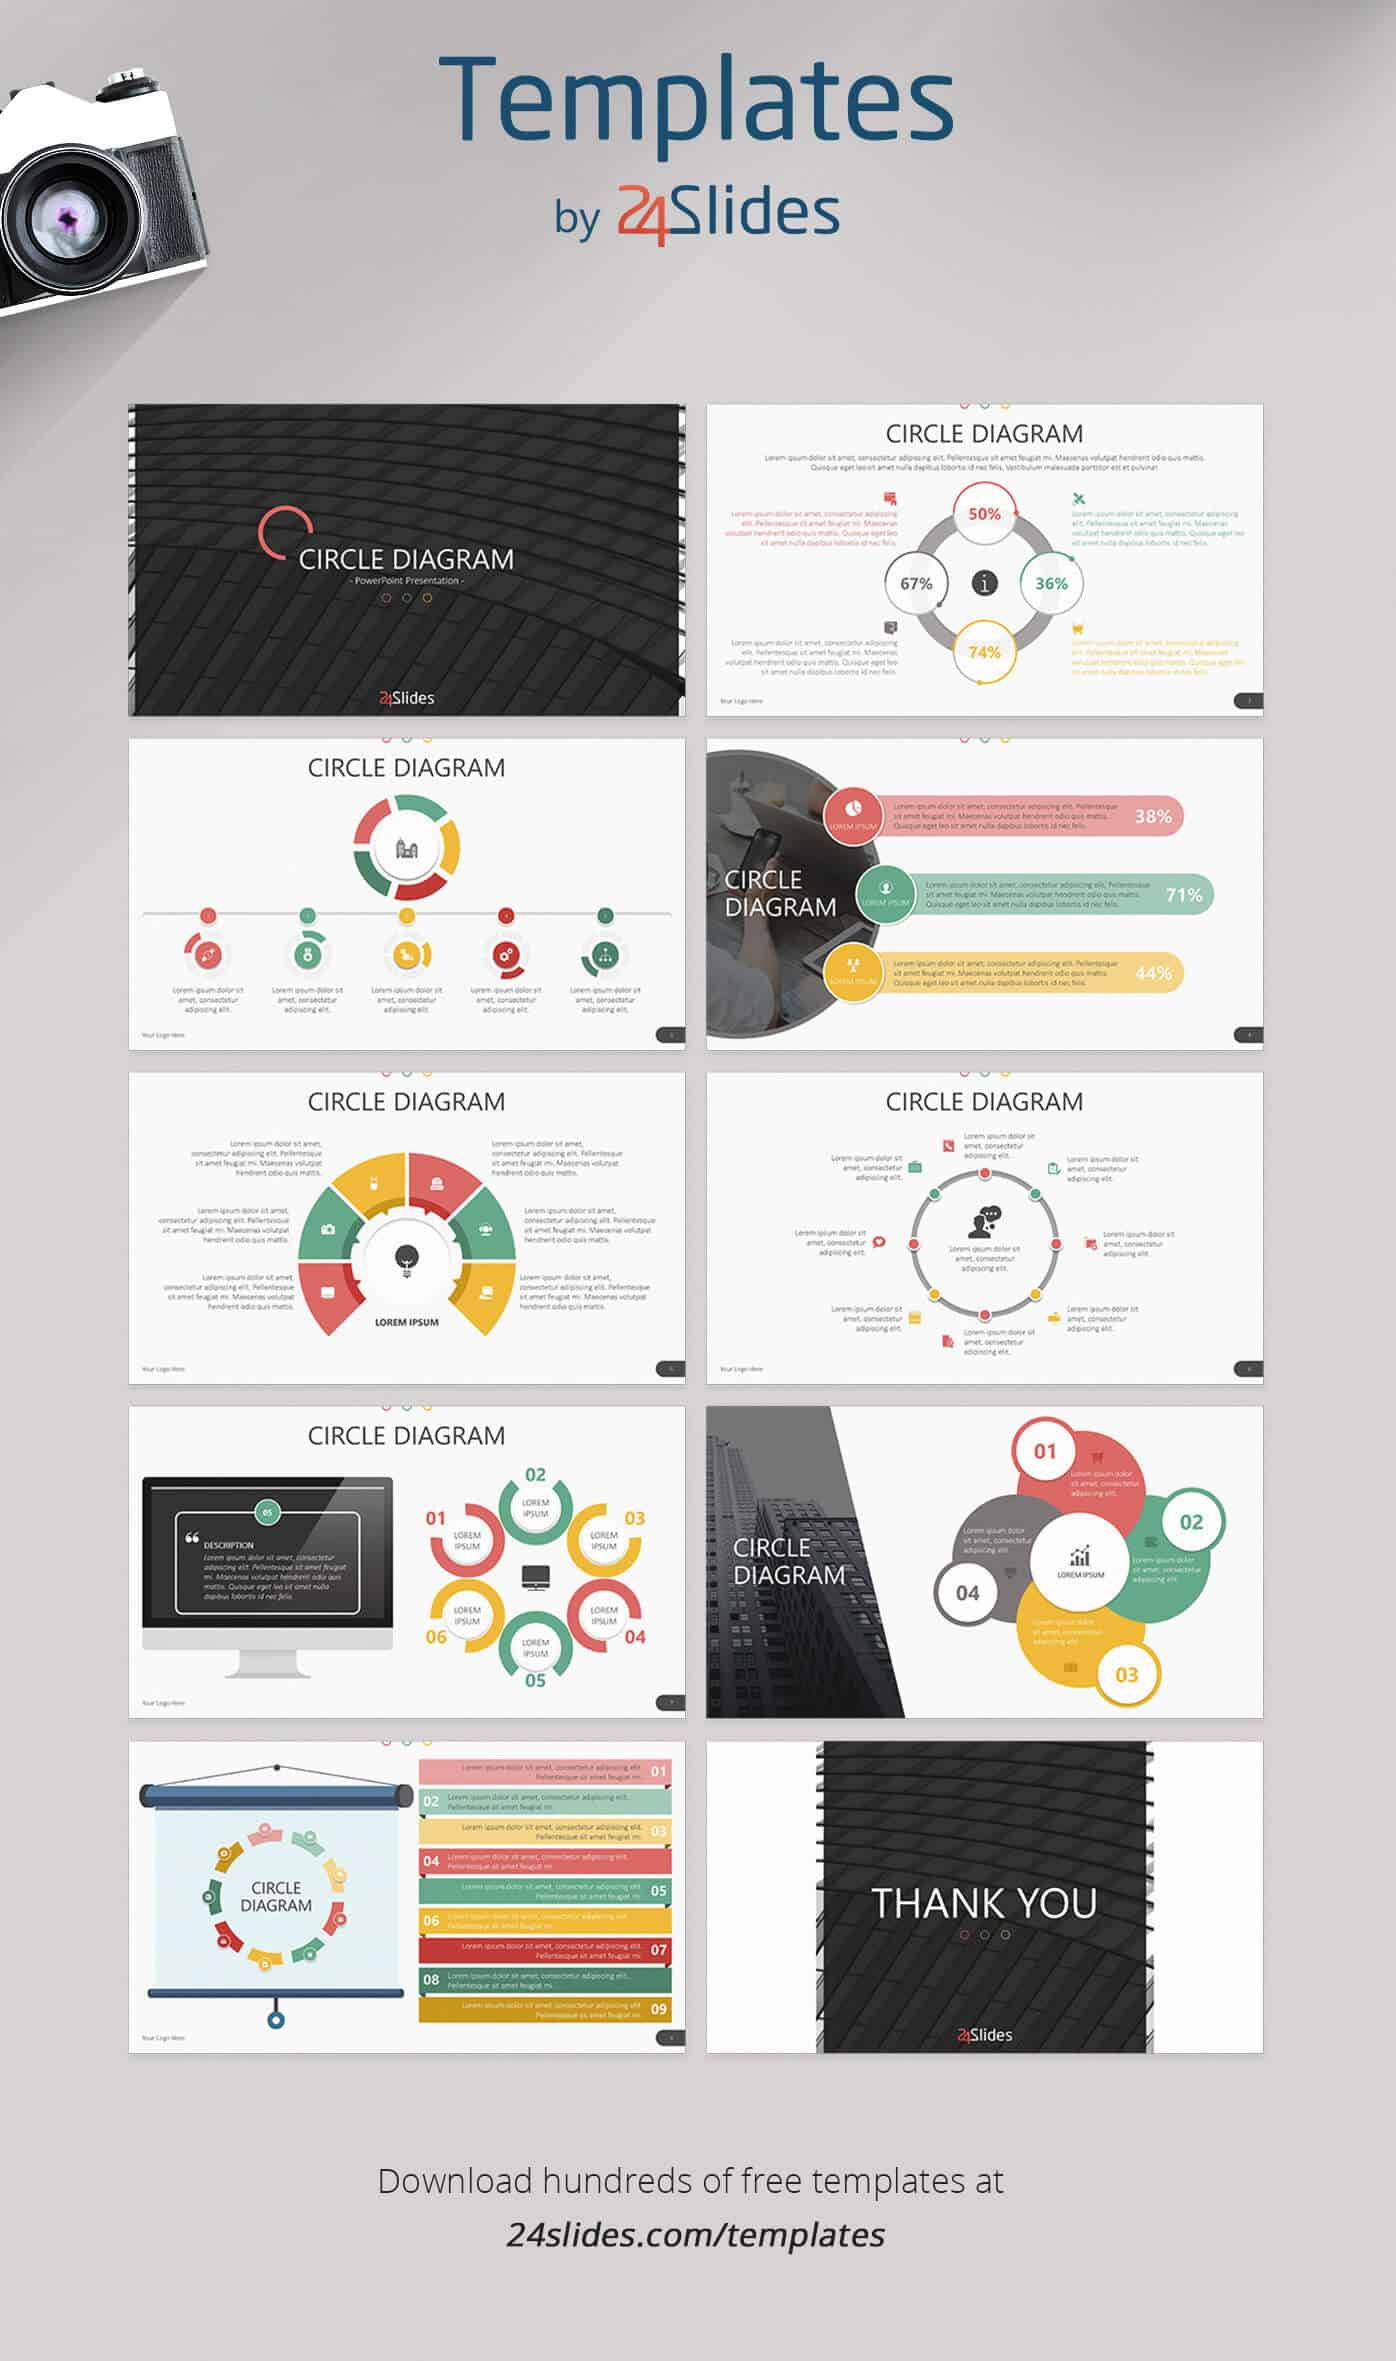 15 Fun And Colorful Free Powerpoint Templates | Present Better With Regard To Powerpoint Photo Slideshow Template